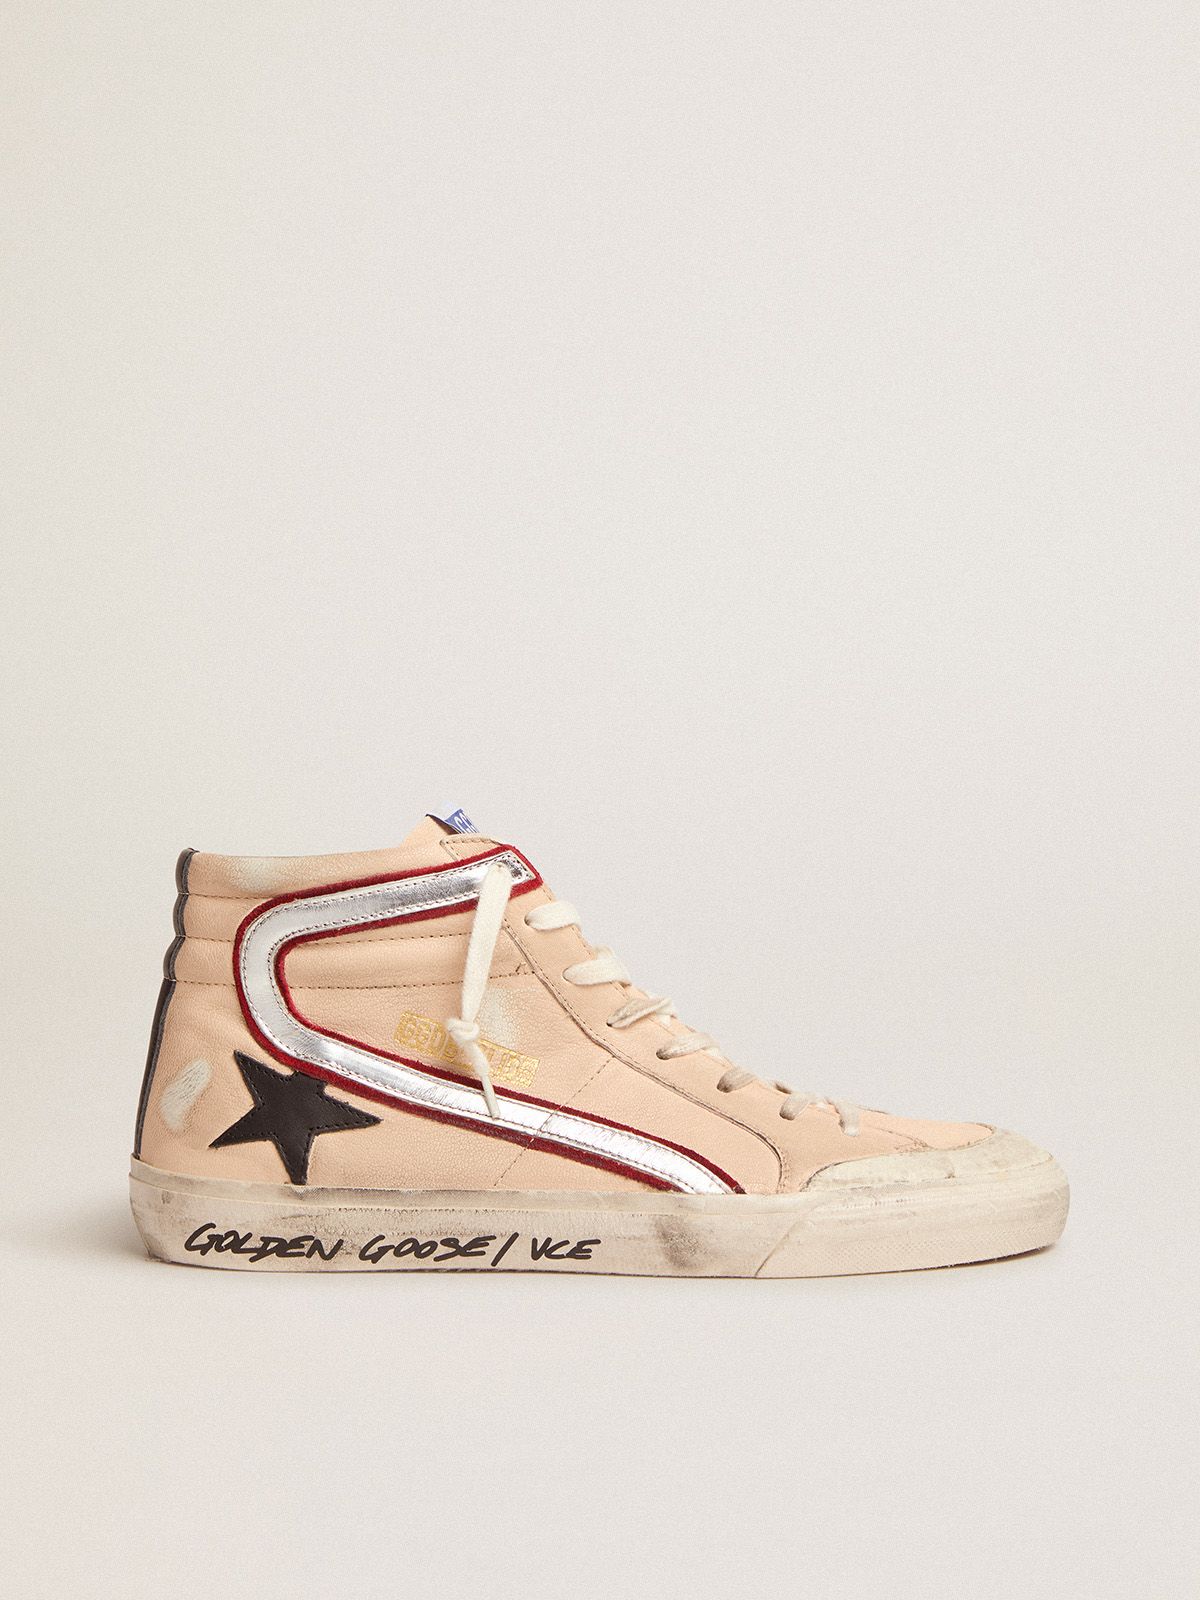 golden goose Penstar Slide flash nappa in black with pale sneakers star leather salmon-colored silver and laminated